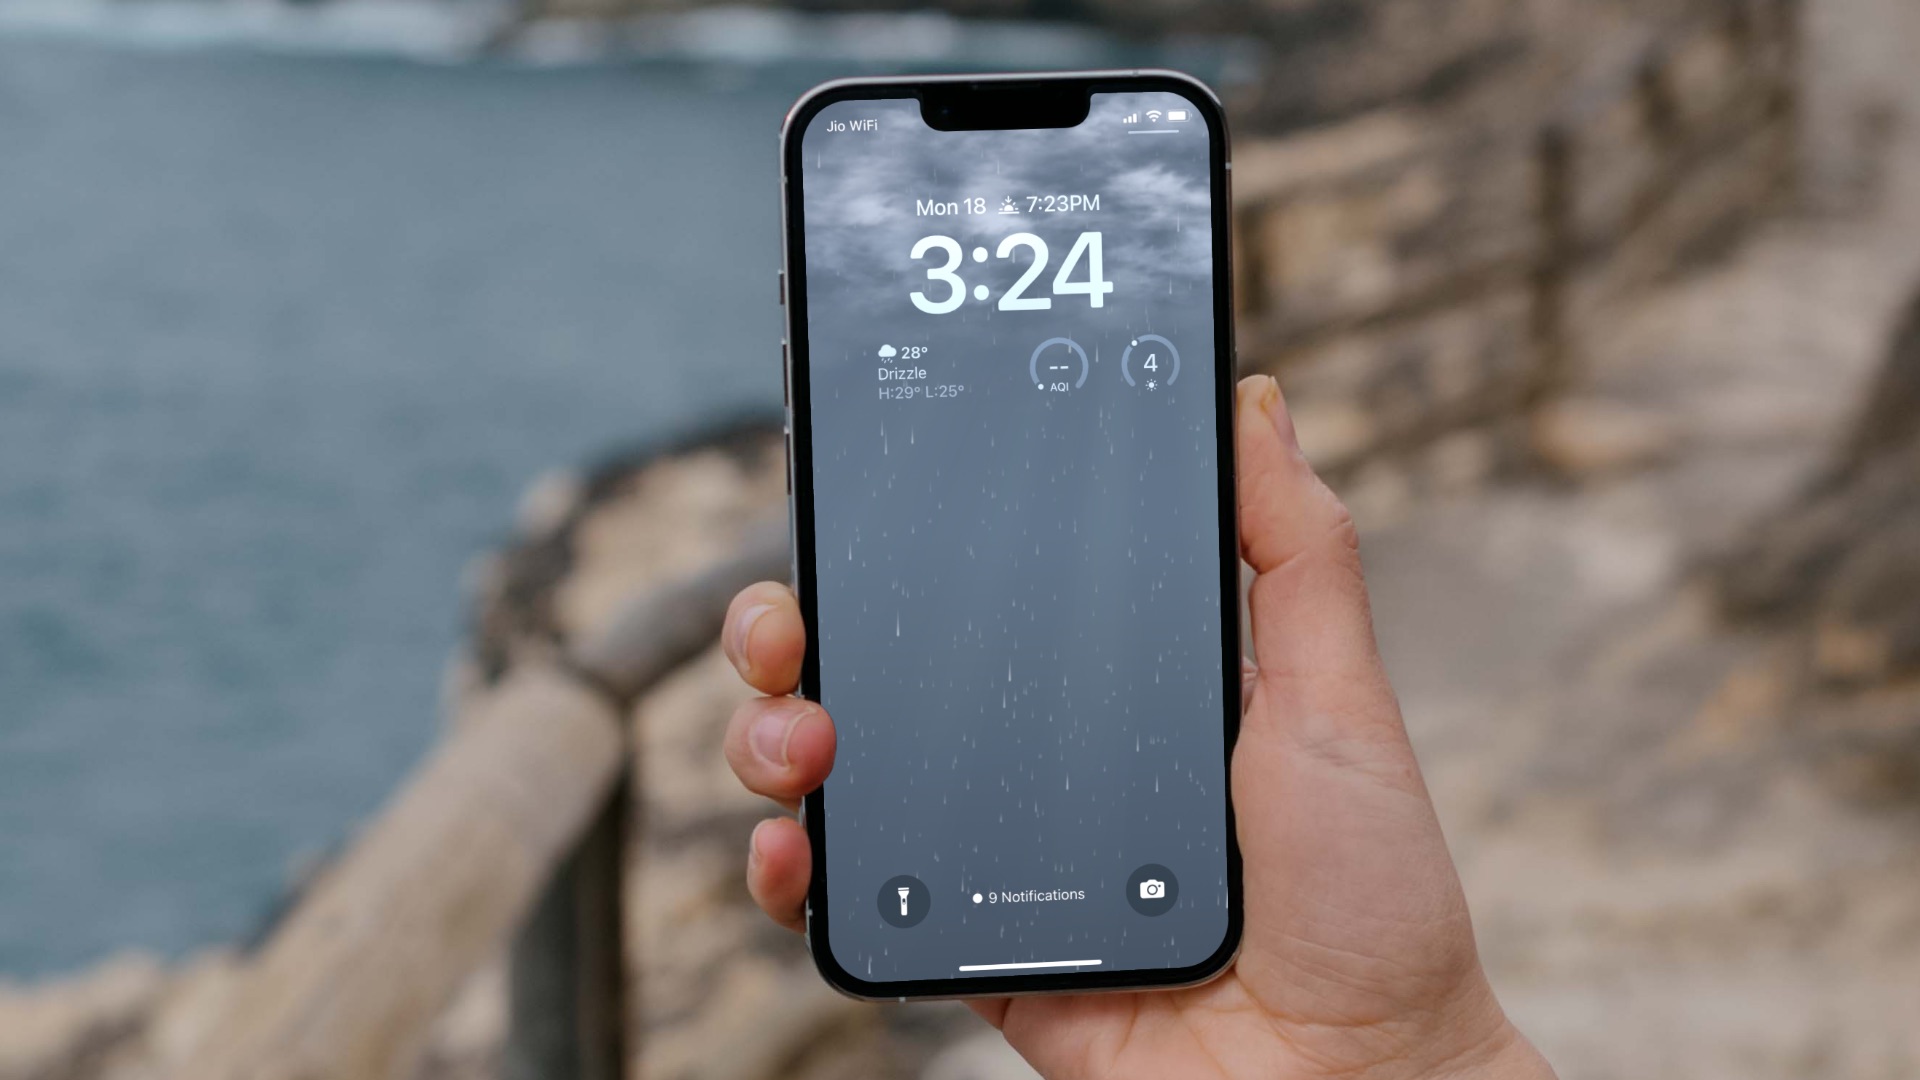 4 Best Tips to Customize iPhone Lock Screen - Guiding Tech